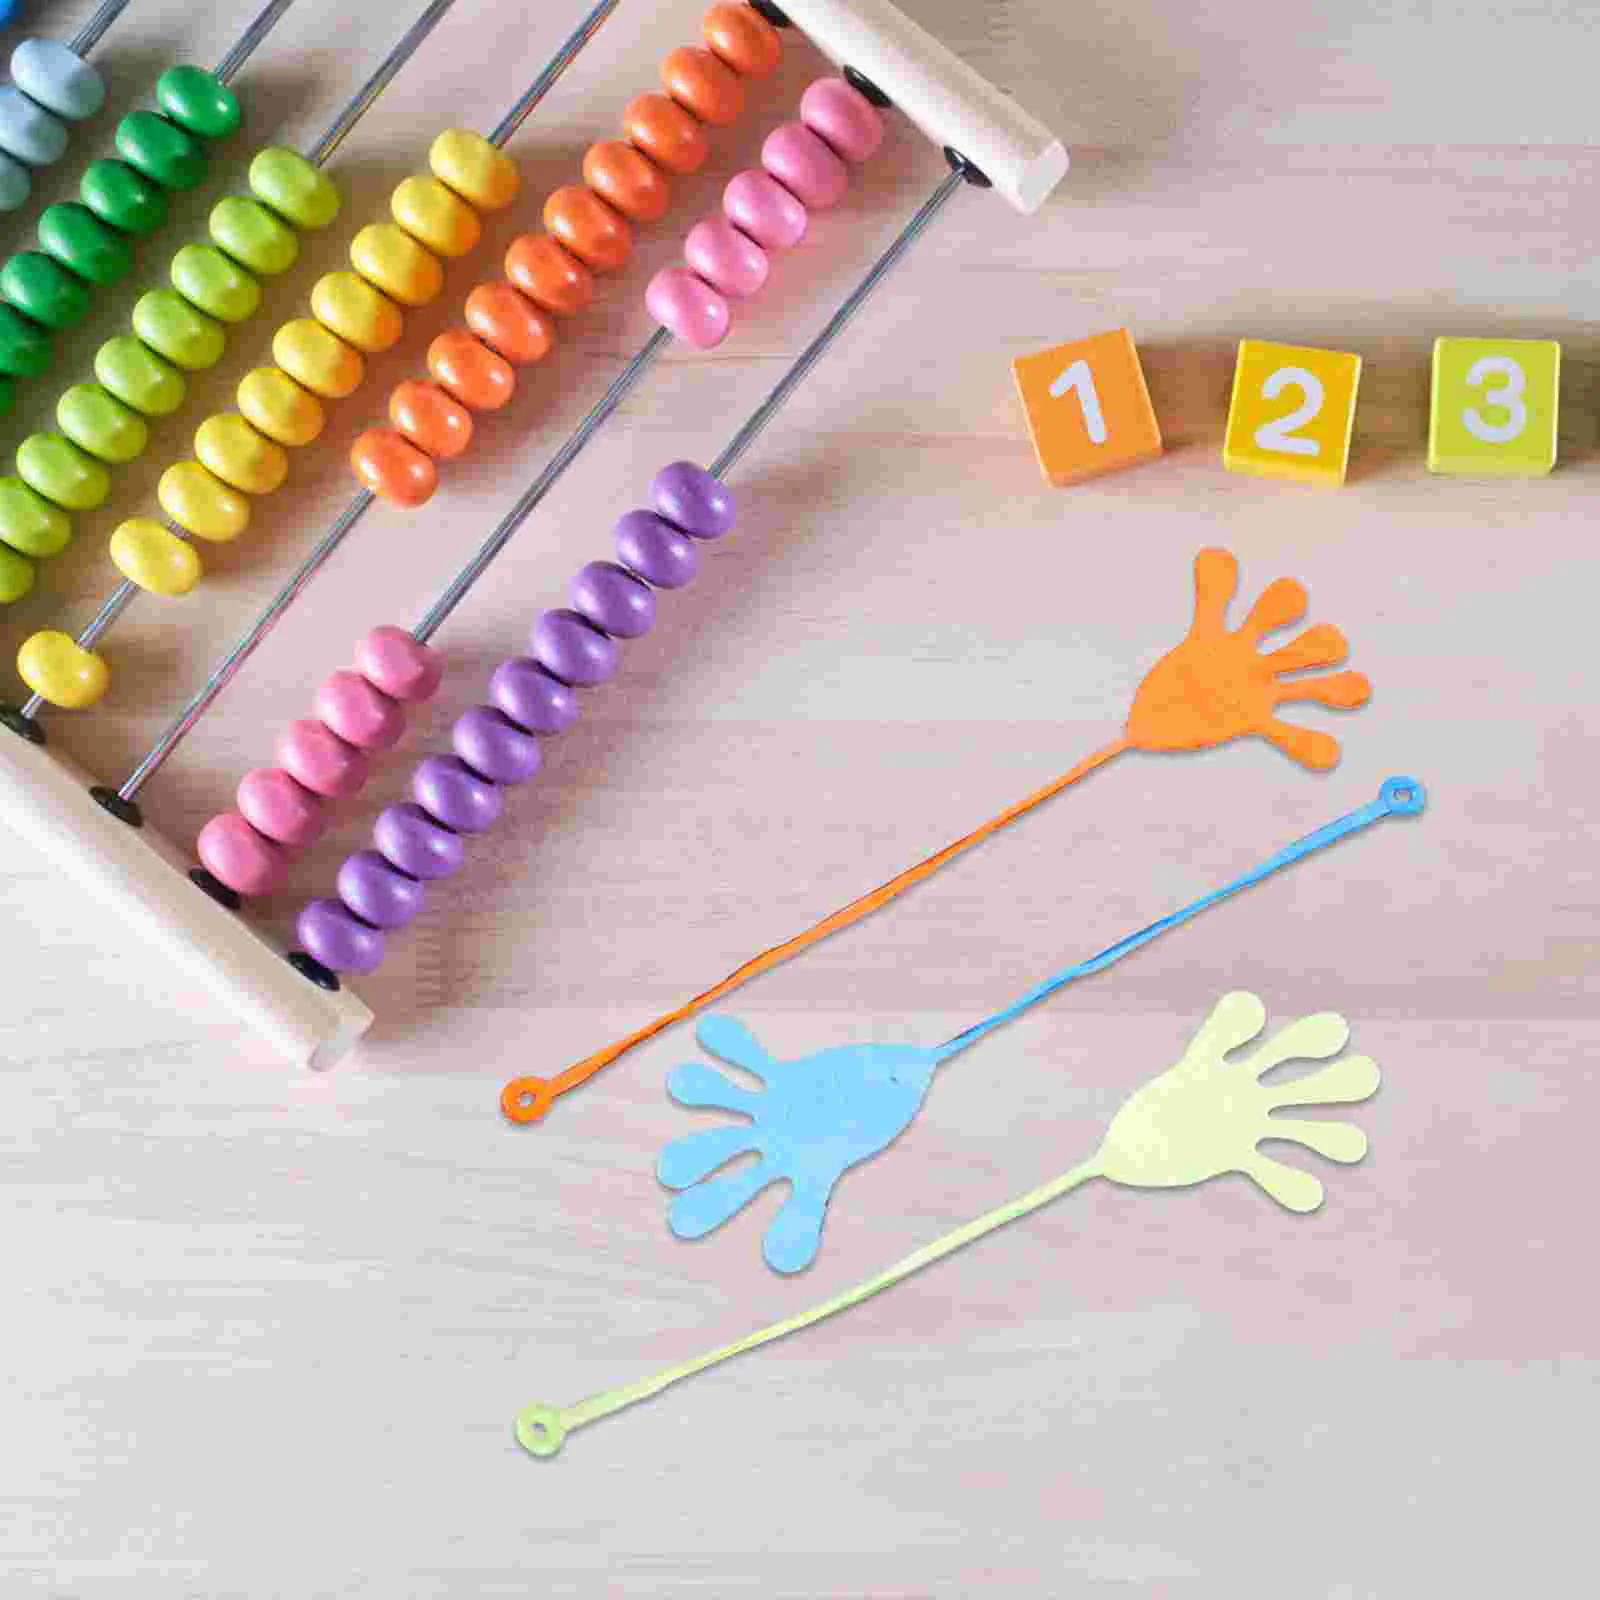 

Sticky Toy Hands Toys Hand Wall Party Favors Glitter Children Kids Stretchy Goodie Slappy Palm Elastic Wacky Fillers Climbing